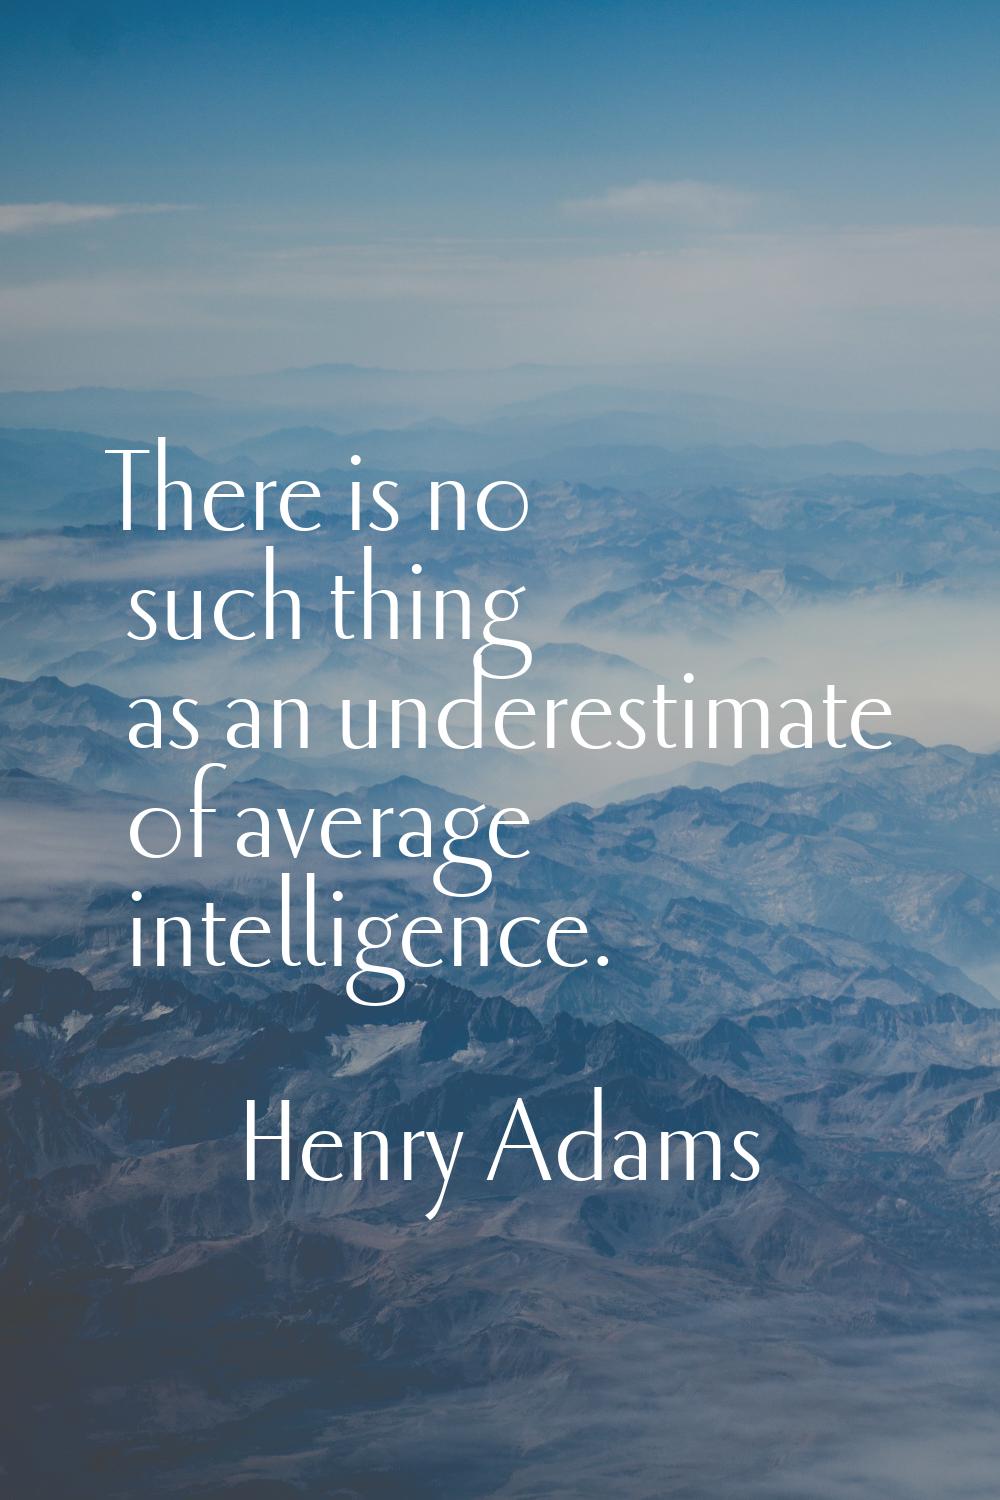 There is no such thing as an underestimate of average intelligence.